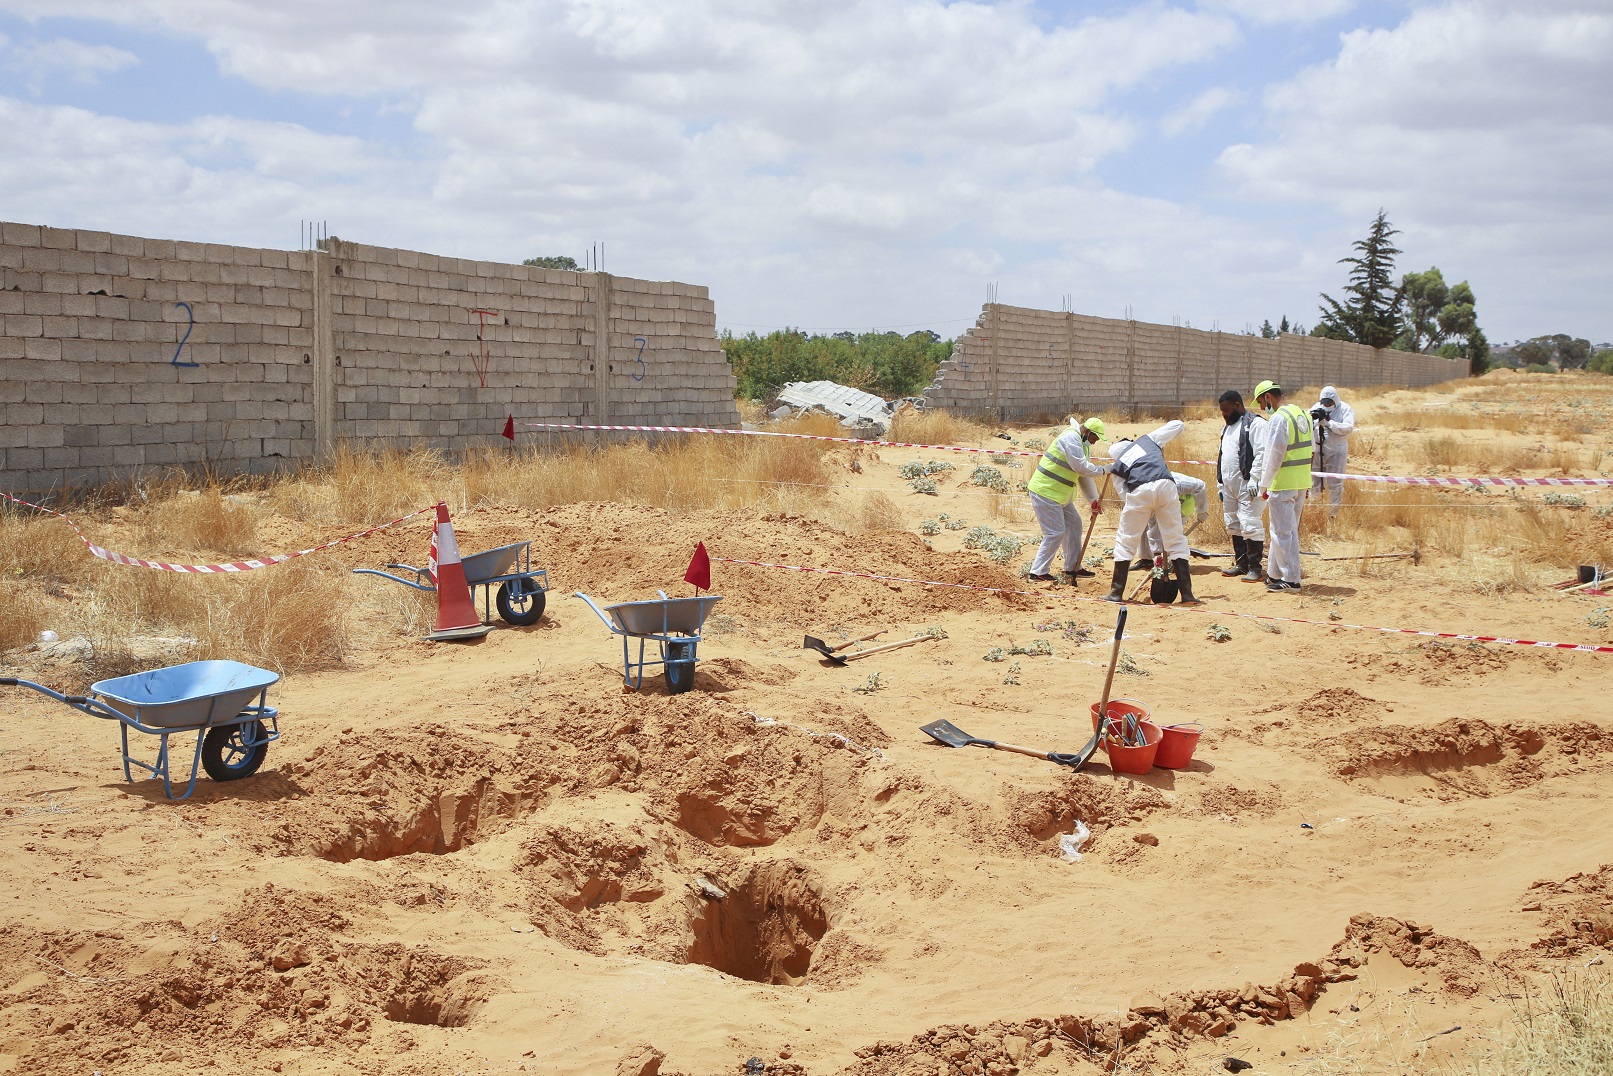 Libyan Ministry of Justice employees dig at the site of a suspected mass grave in Tarhouna, Libya on June 23, 2020.